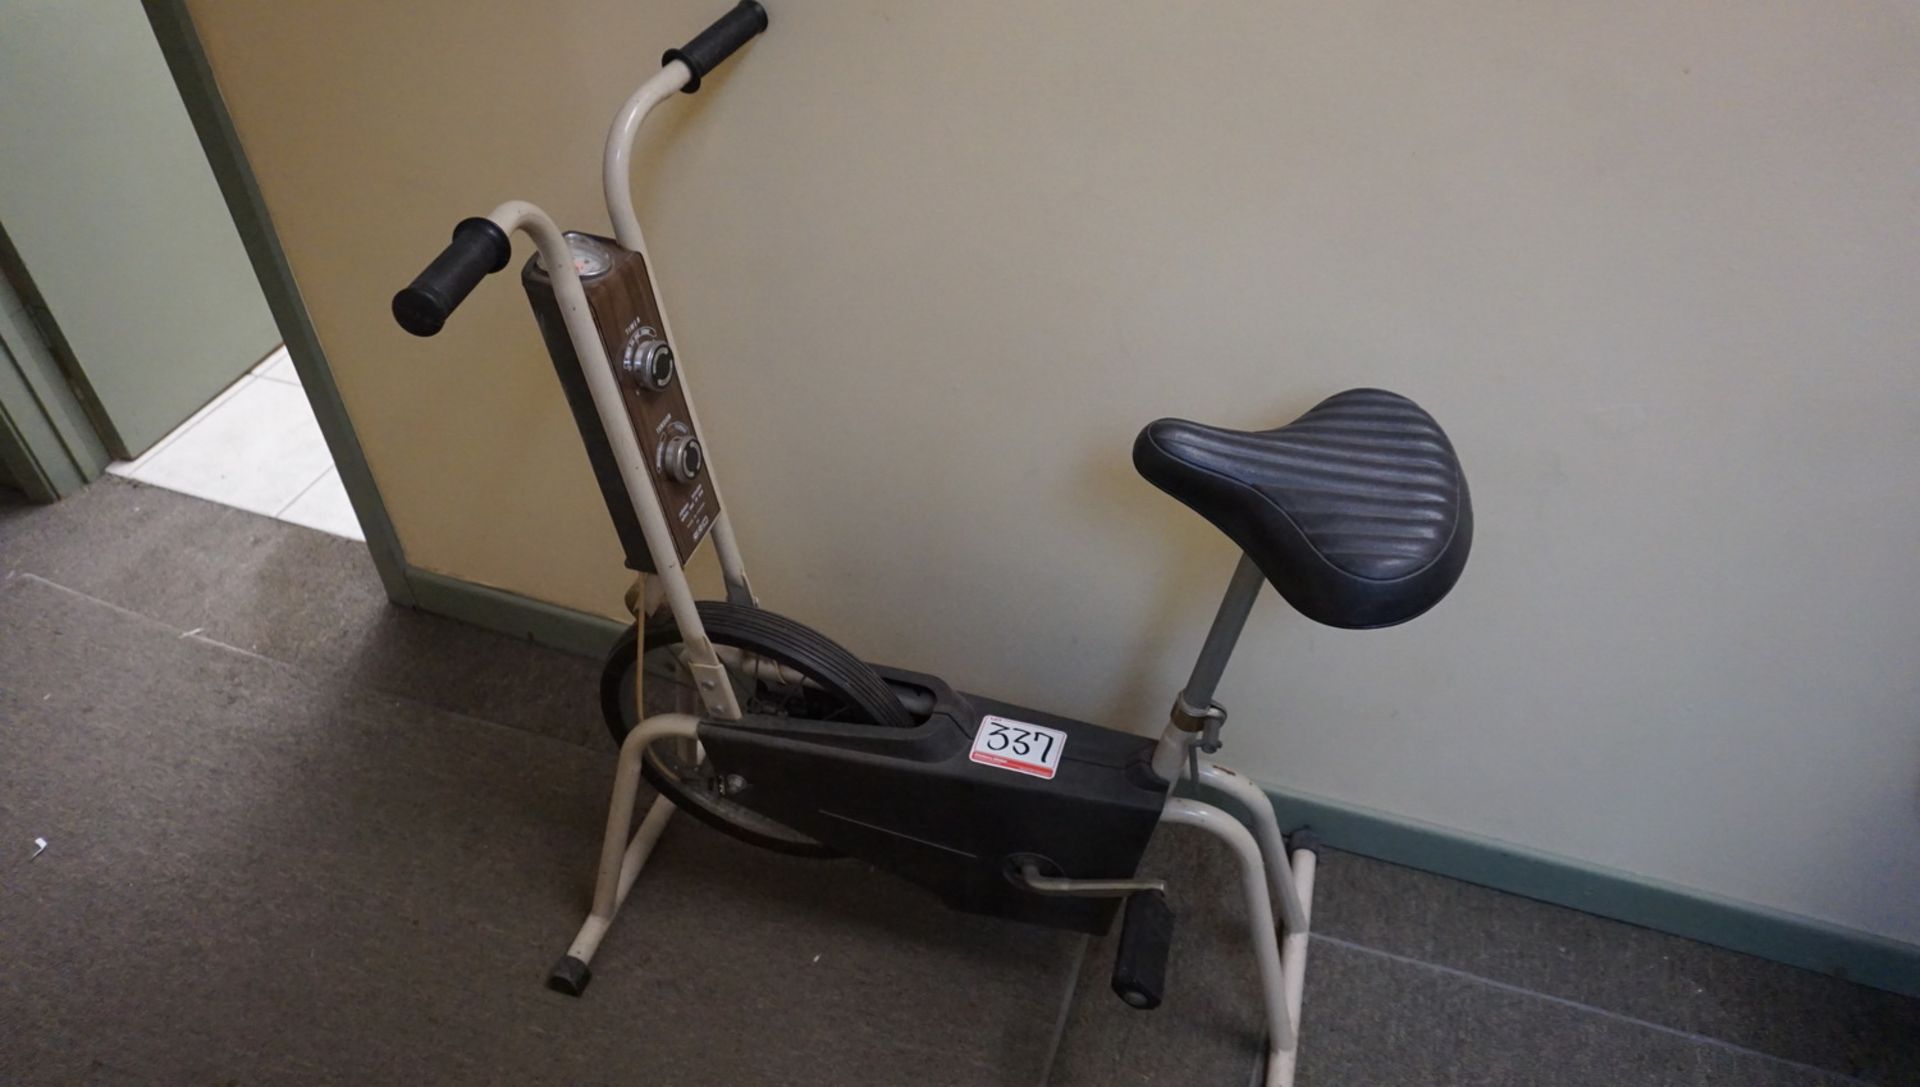 CCM STATIONARY FITNESS BICYCLE